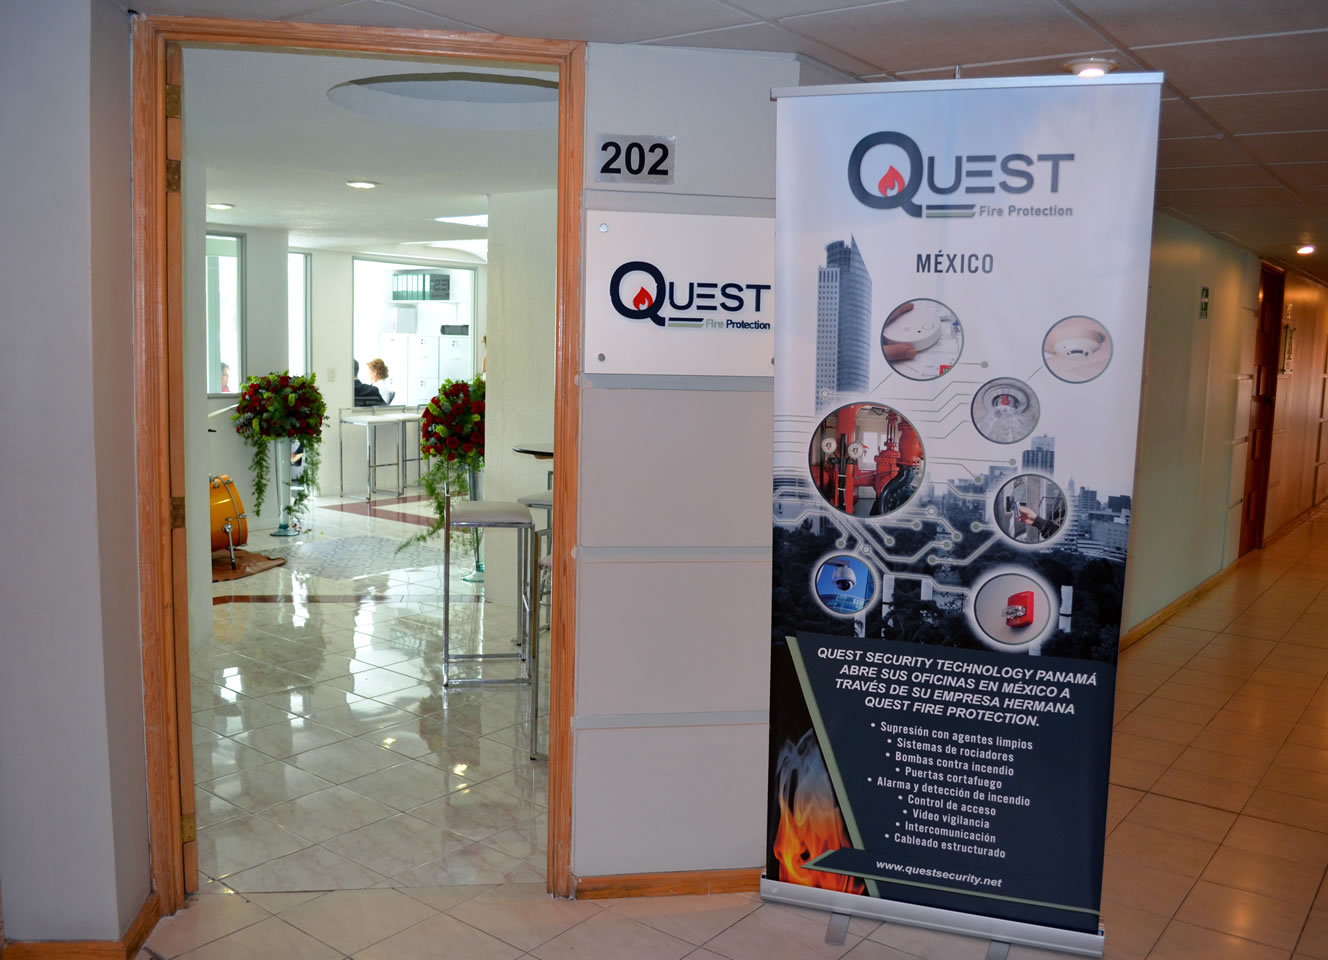 Logotipo Quest Fire Protection